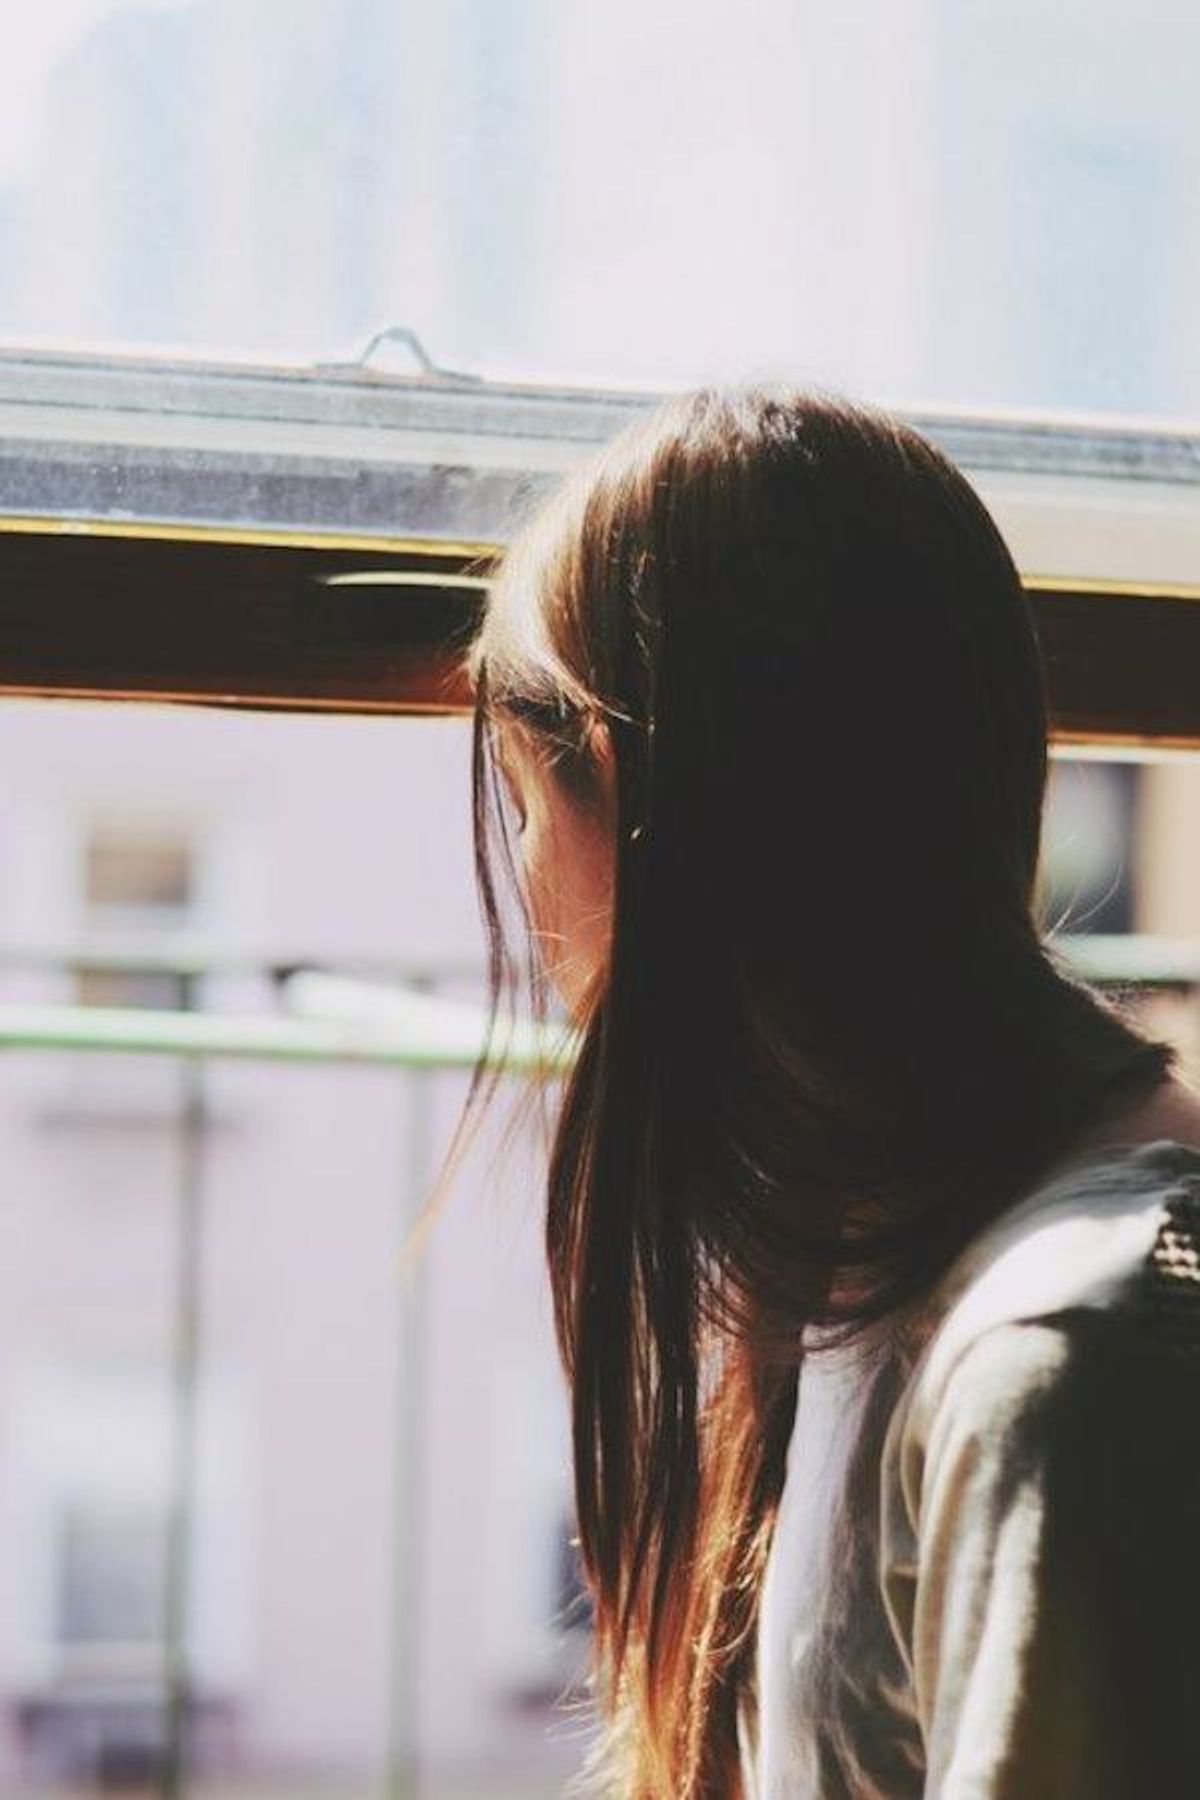 21 Quotes That Everyone In Their Twenties Needs To Read